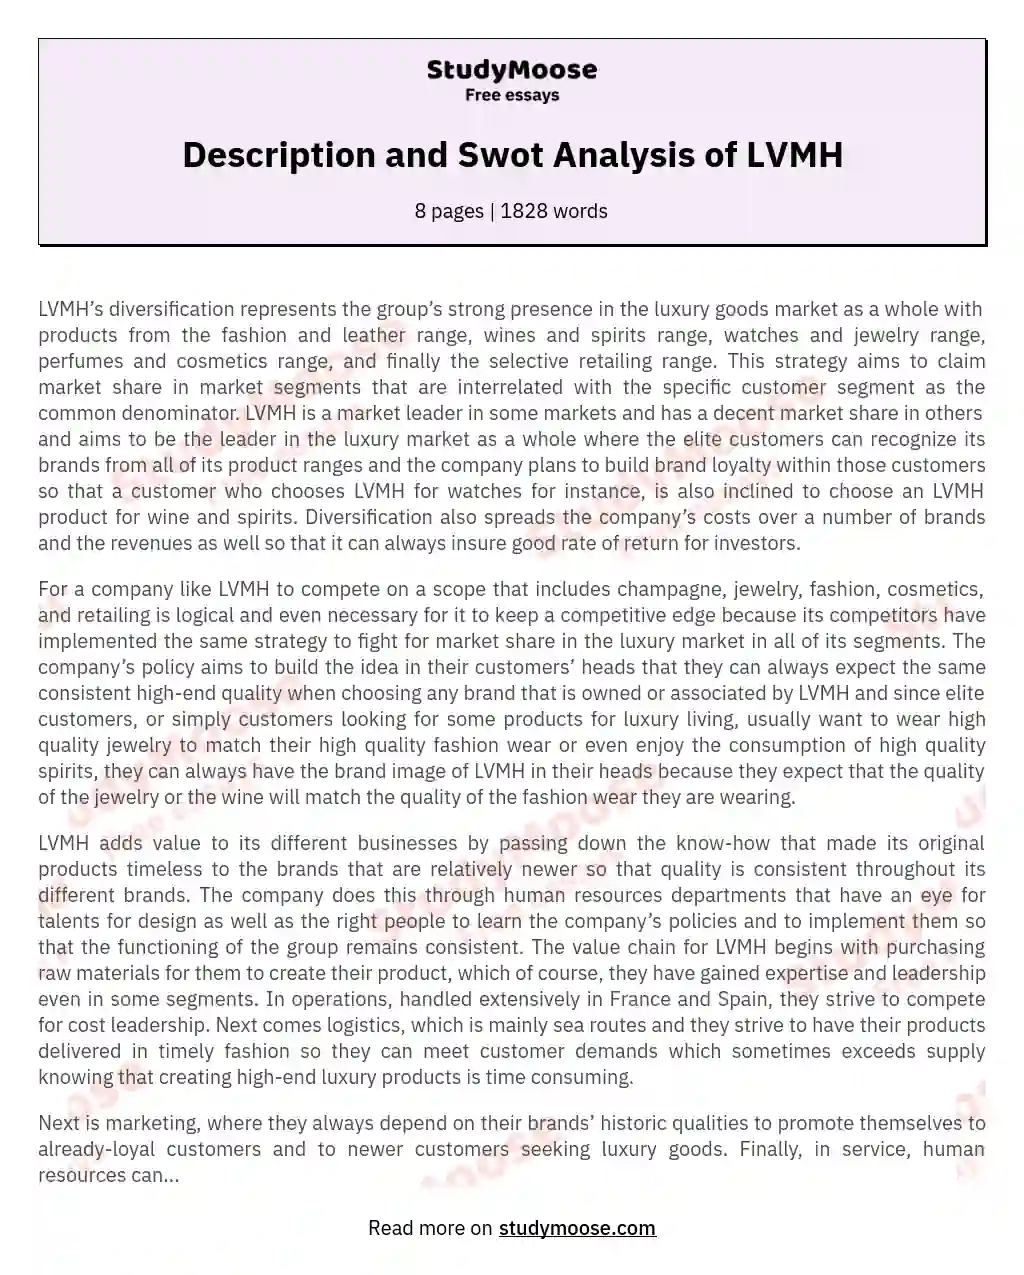 Description and Swot Analysis of LVMH essay